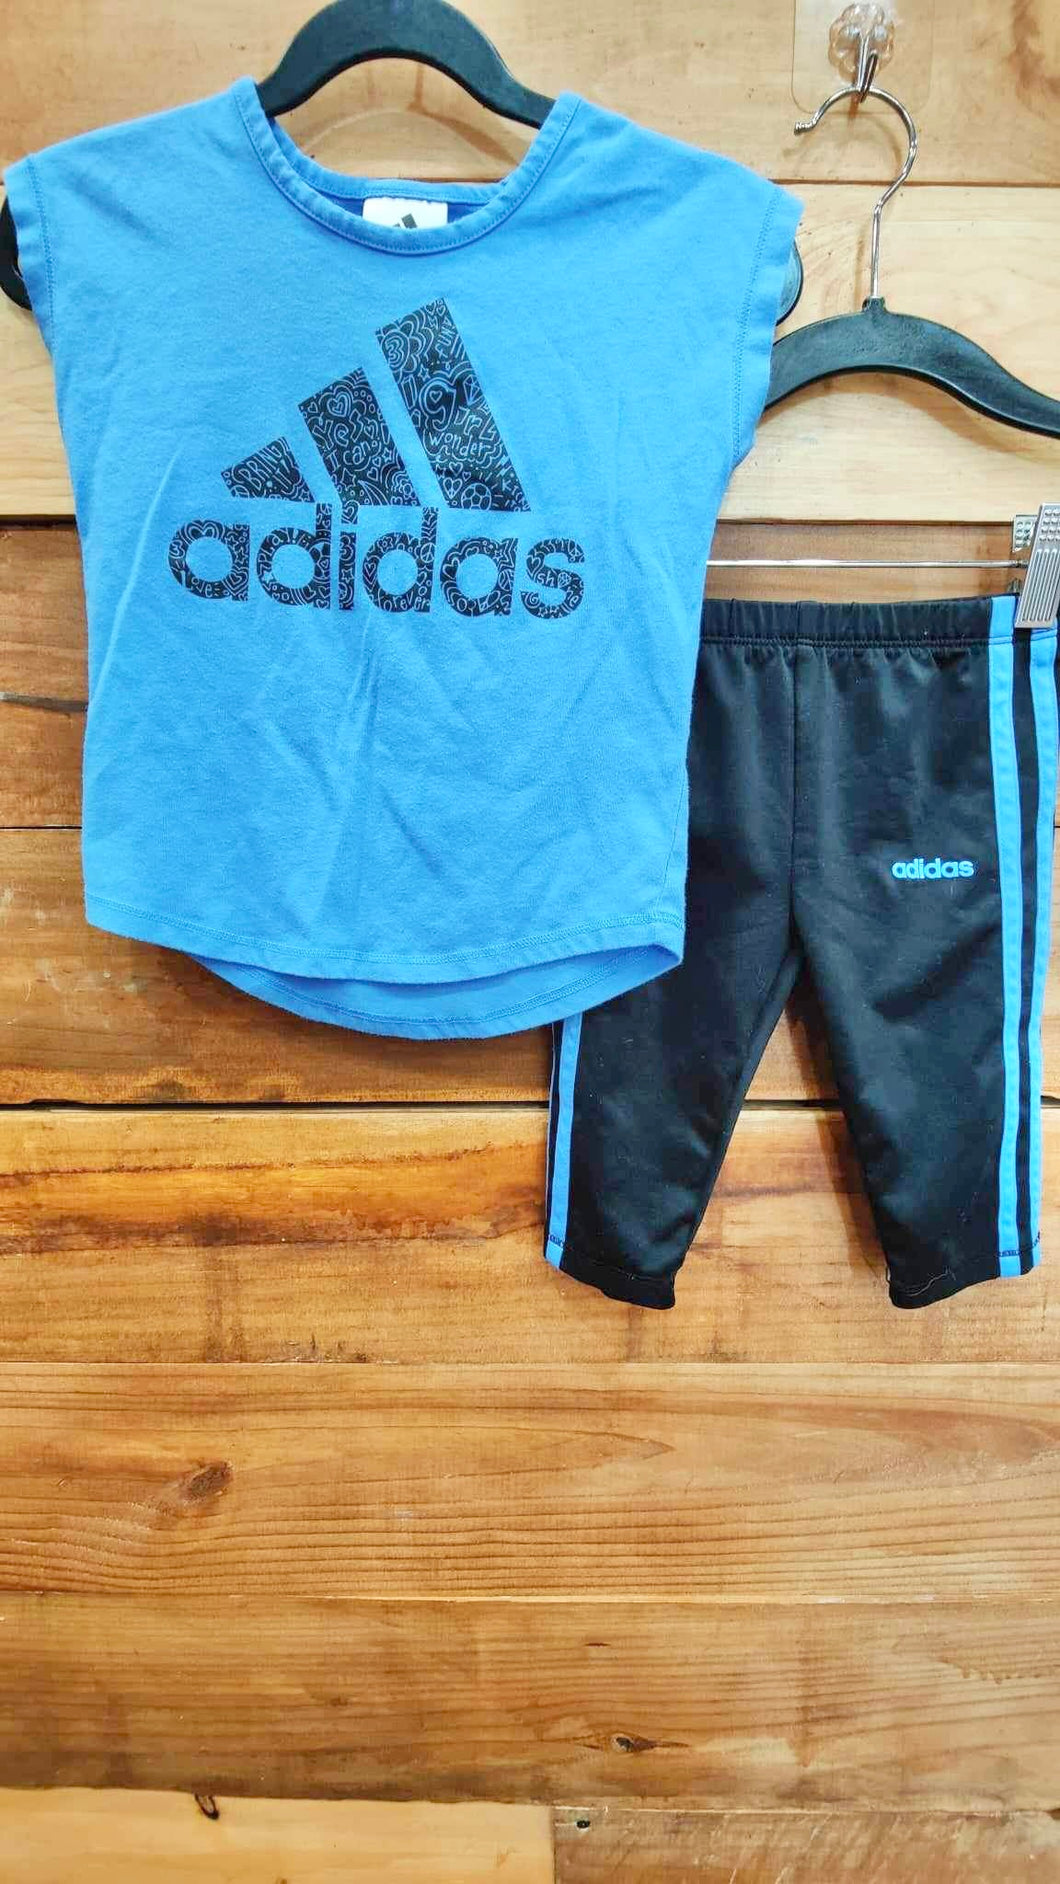 Adidas Periwinkle 2pc Outfit Size 2T